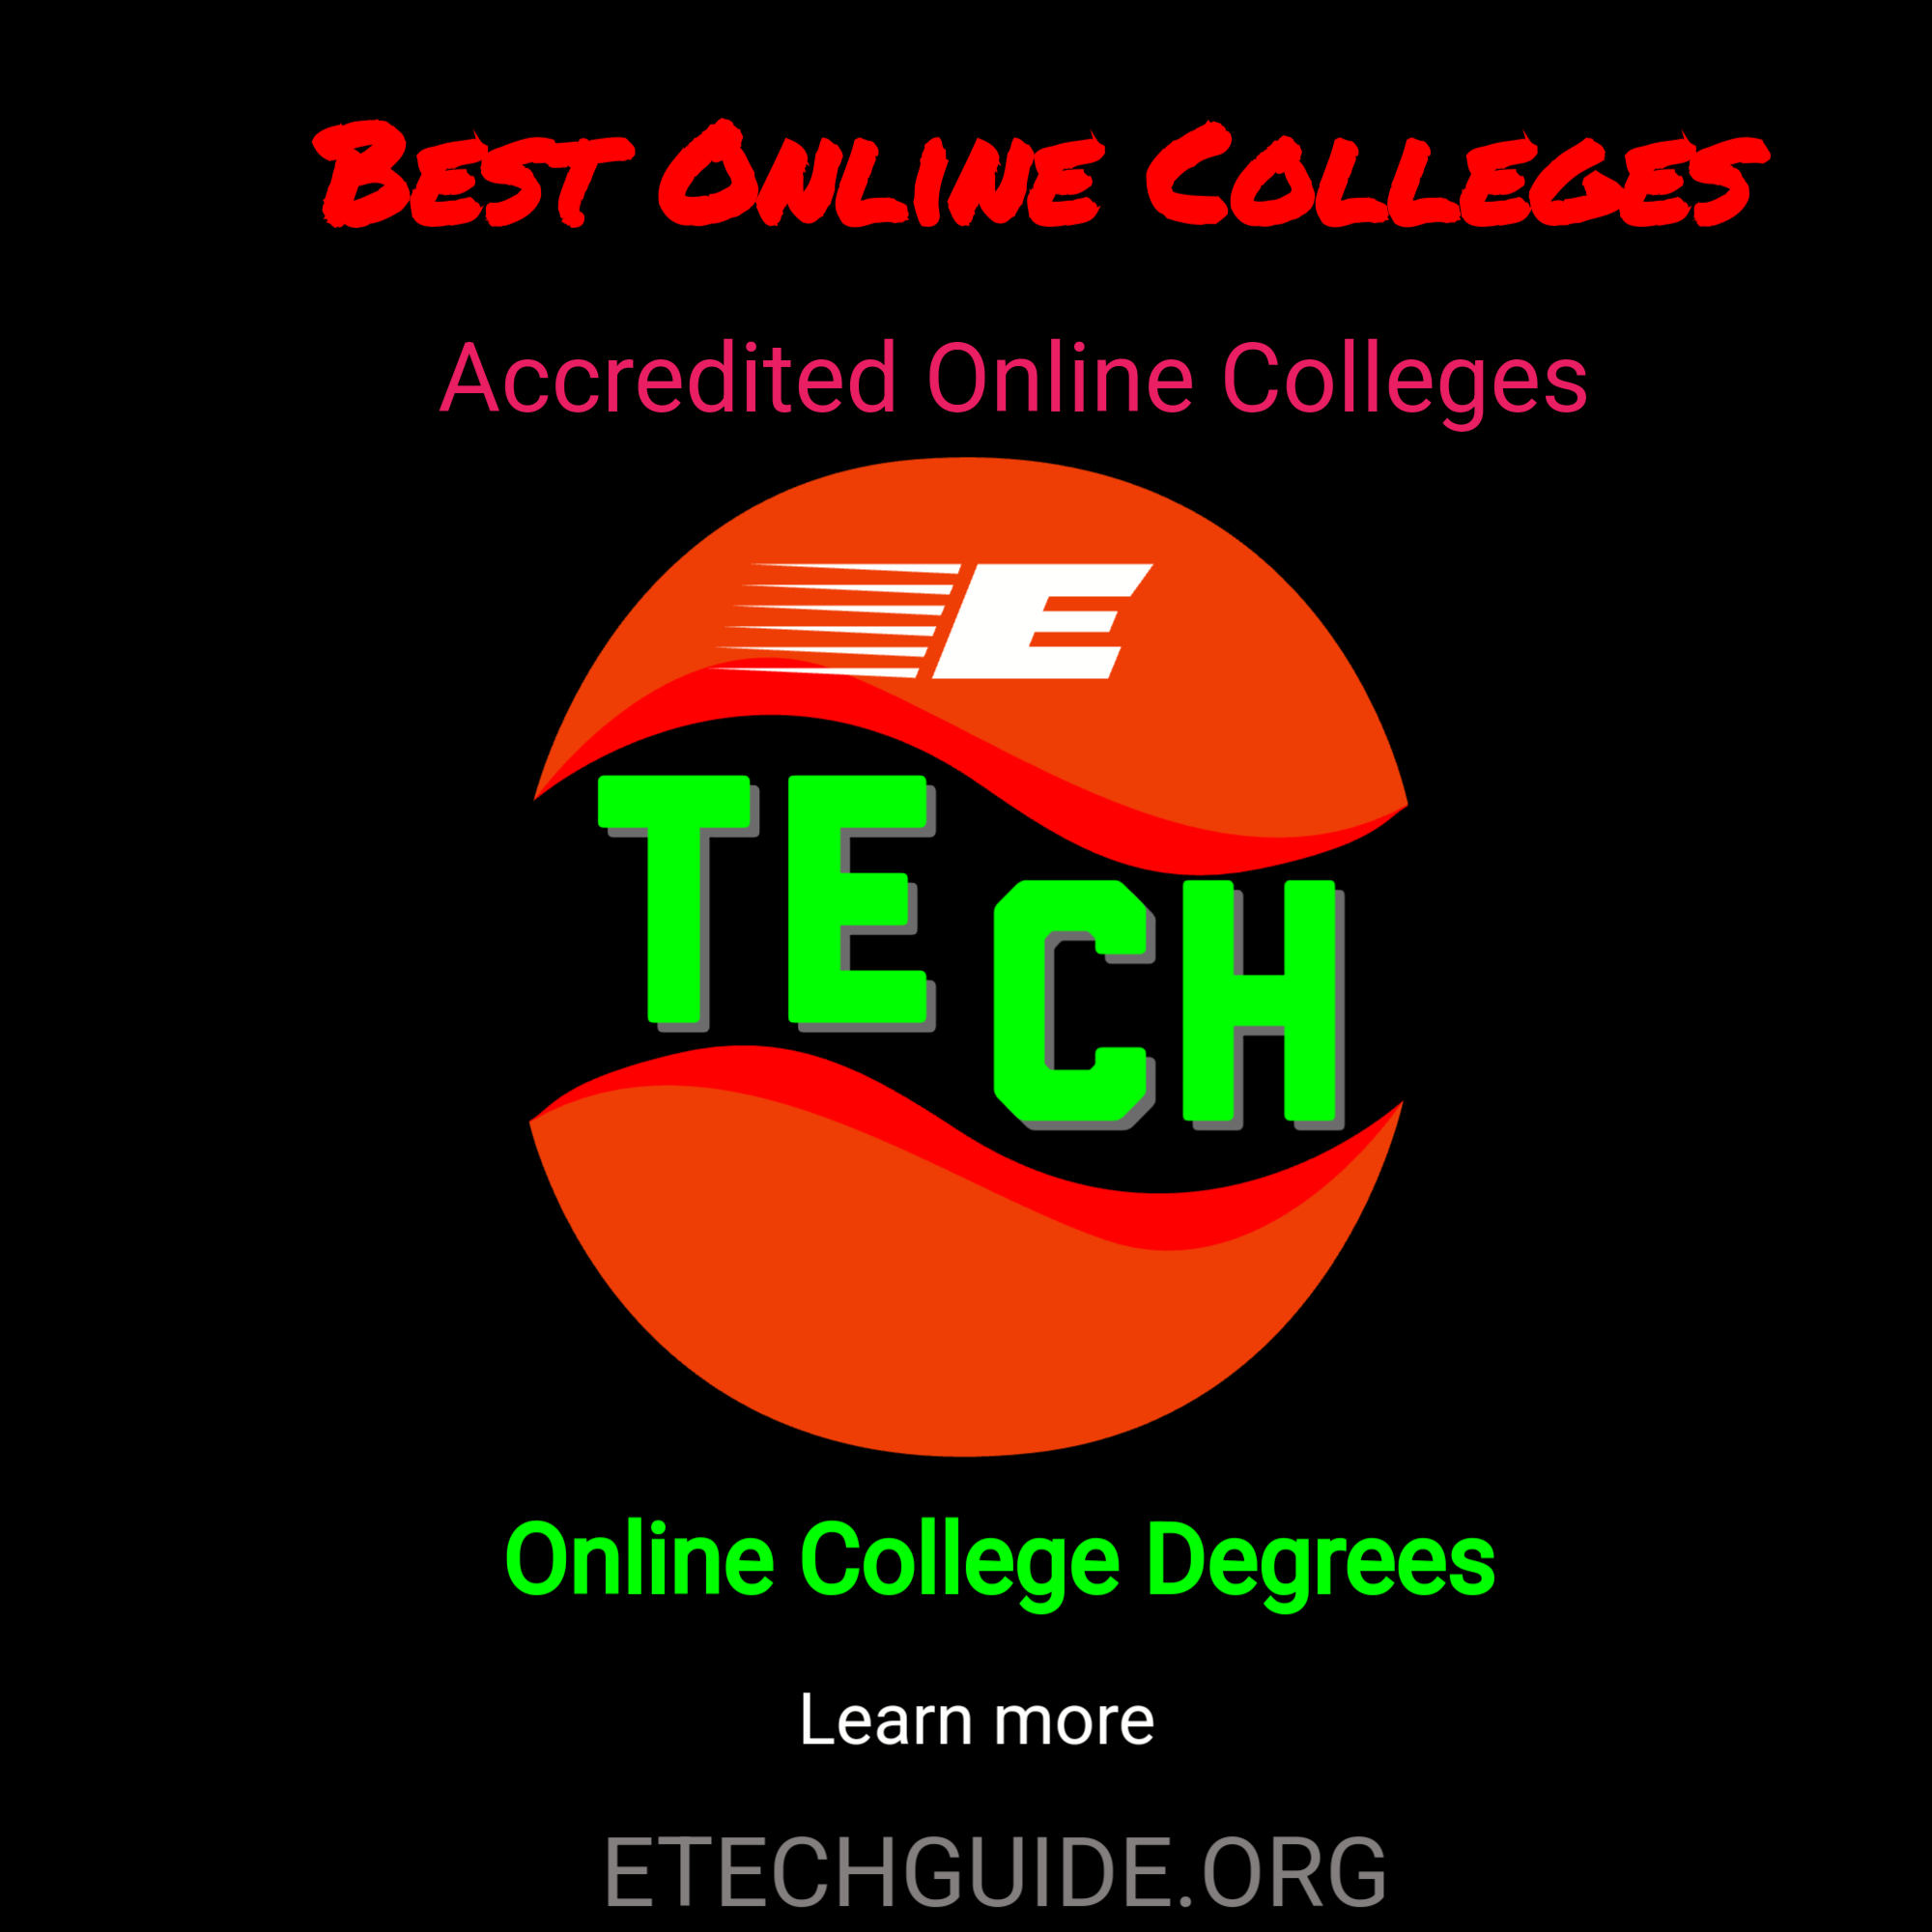 best online colleges | online colleges | Online College Degrees | Accredited Online Colleges